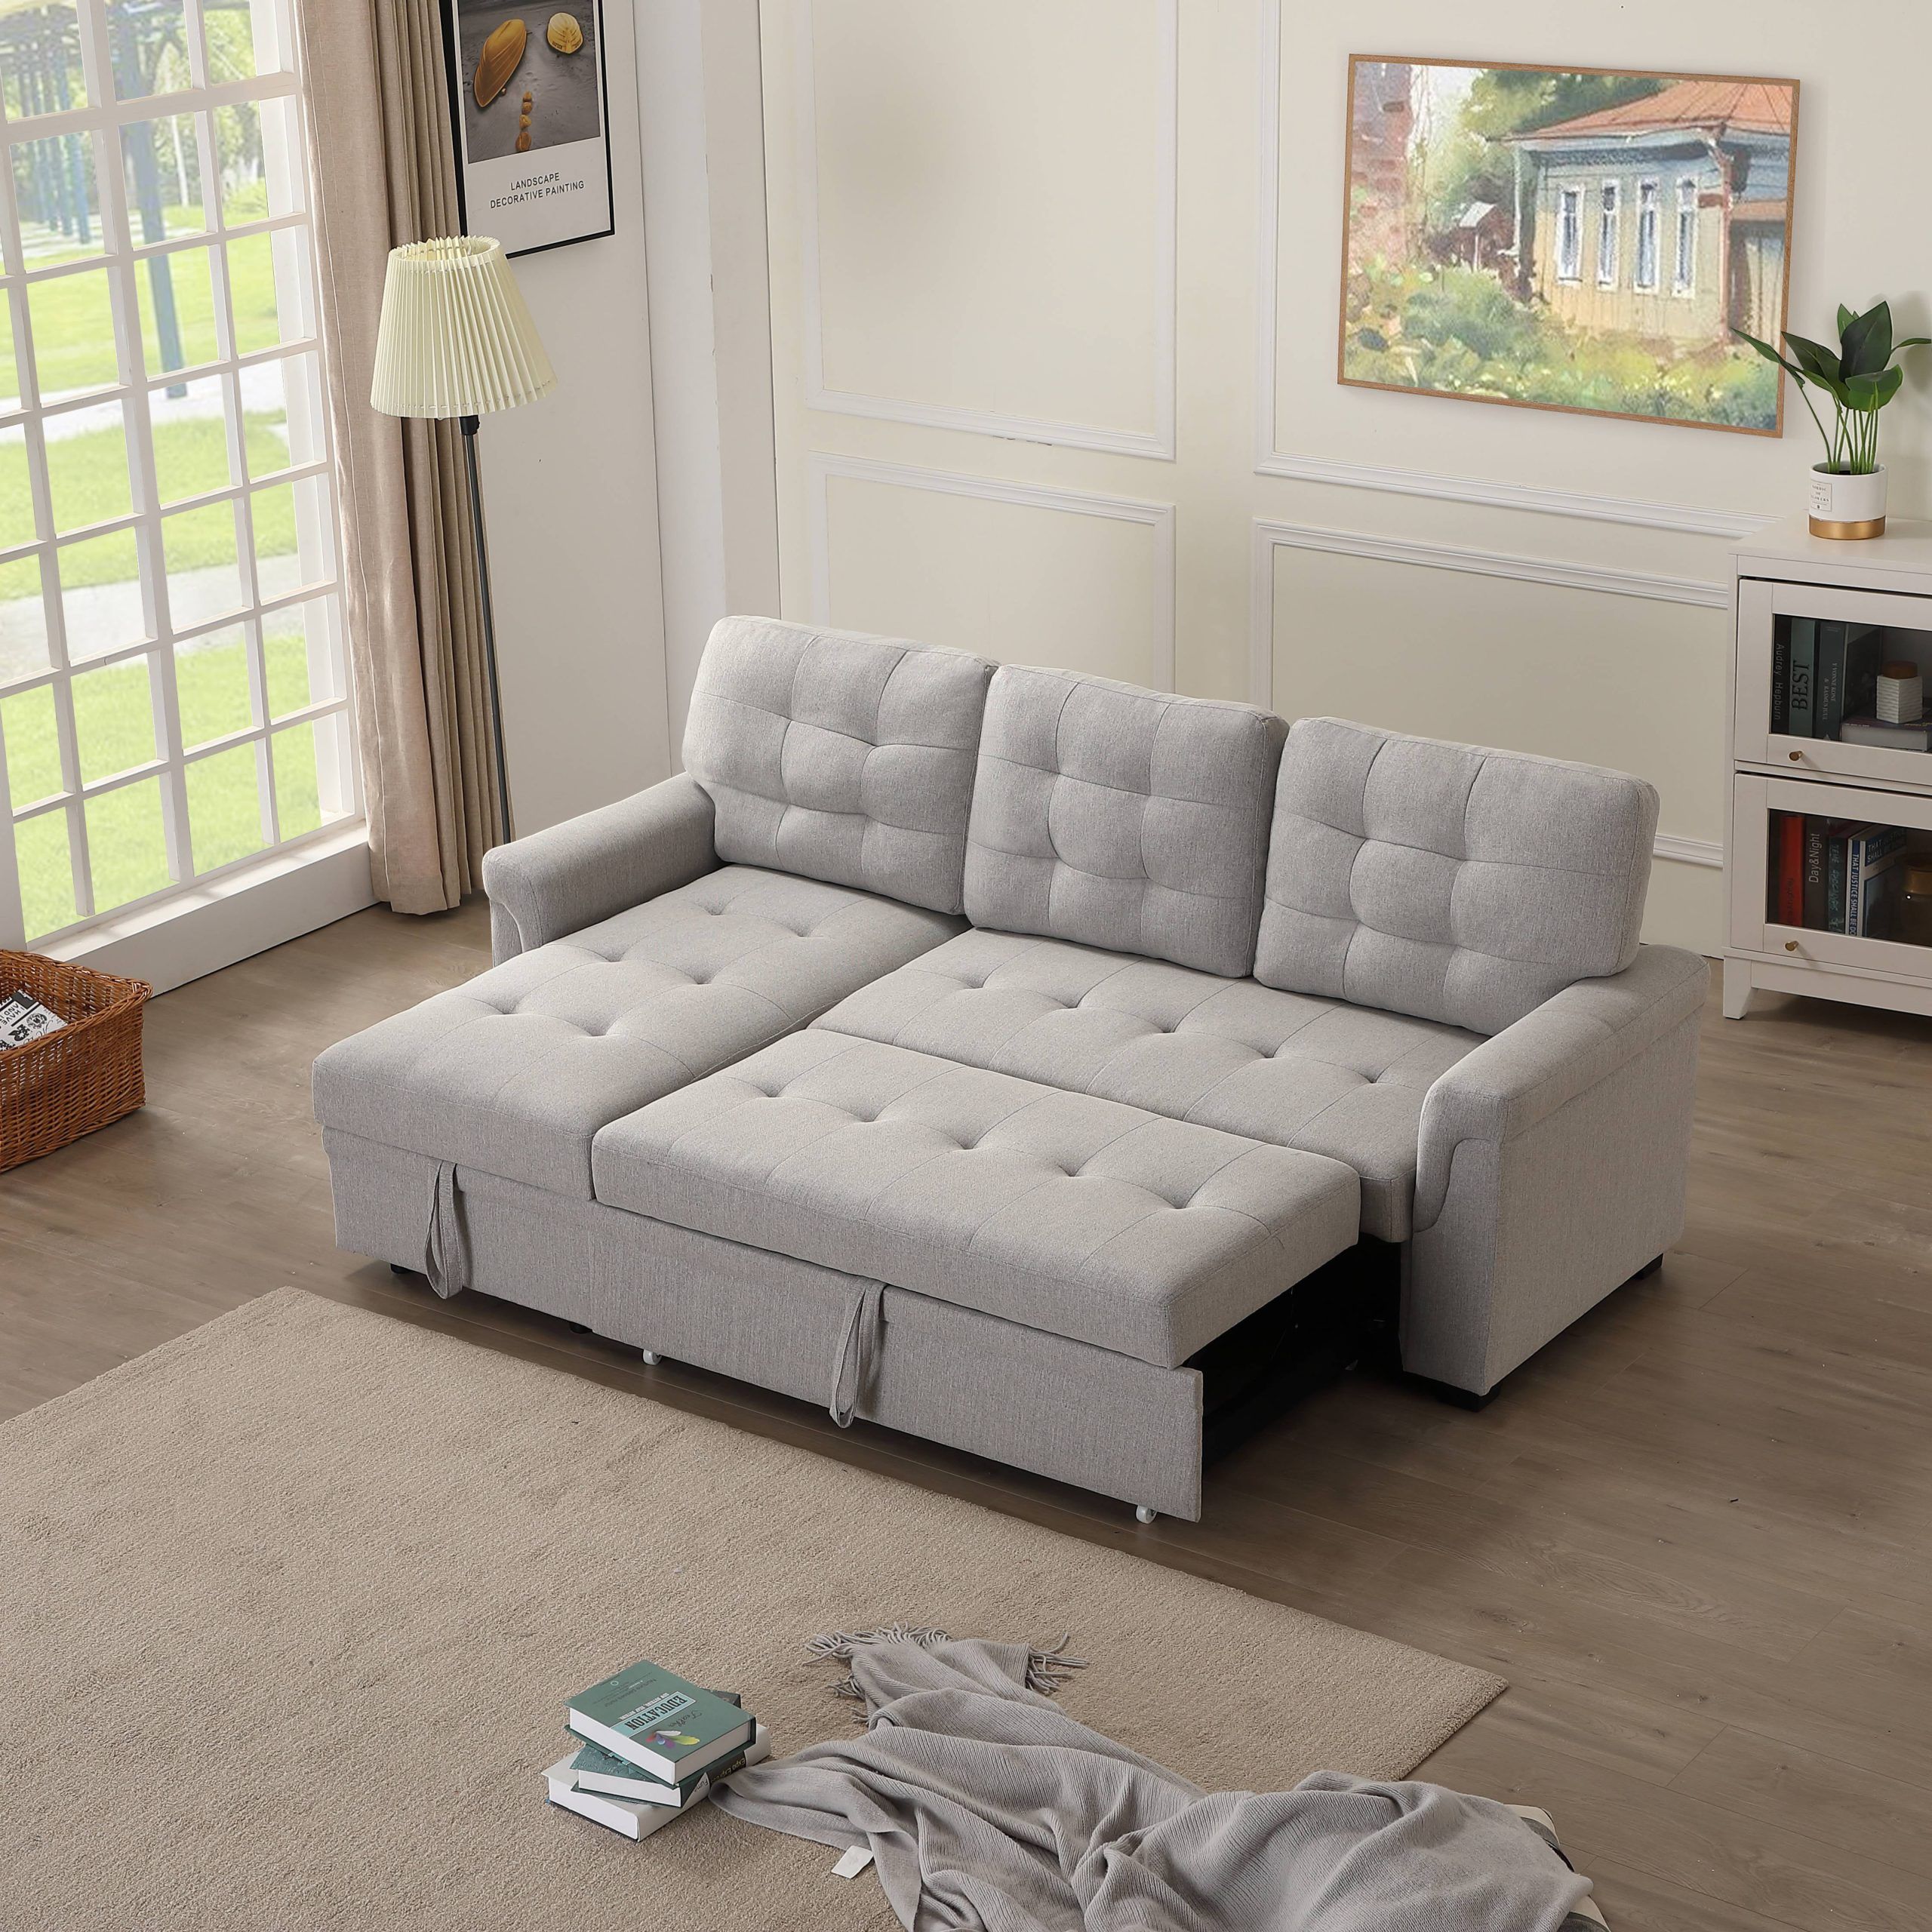 Madison Home Traditional Small Space Velvet Sectional Sofa With Inside Well Known Modern Velvet Sofa Recliners With Storage (View 14 of 15)